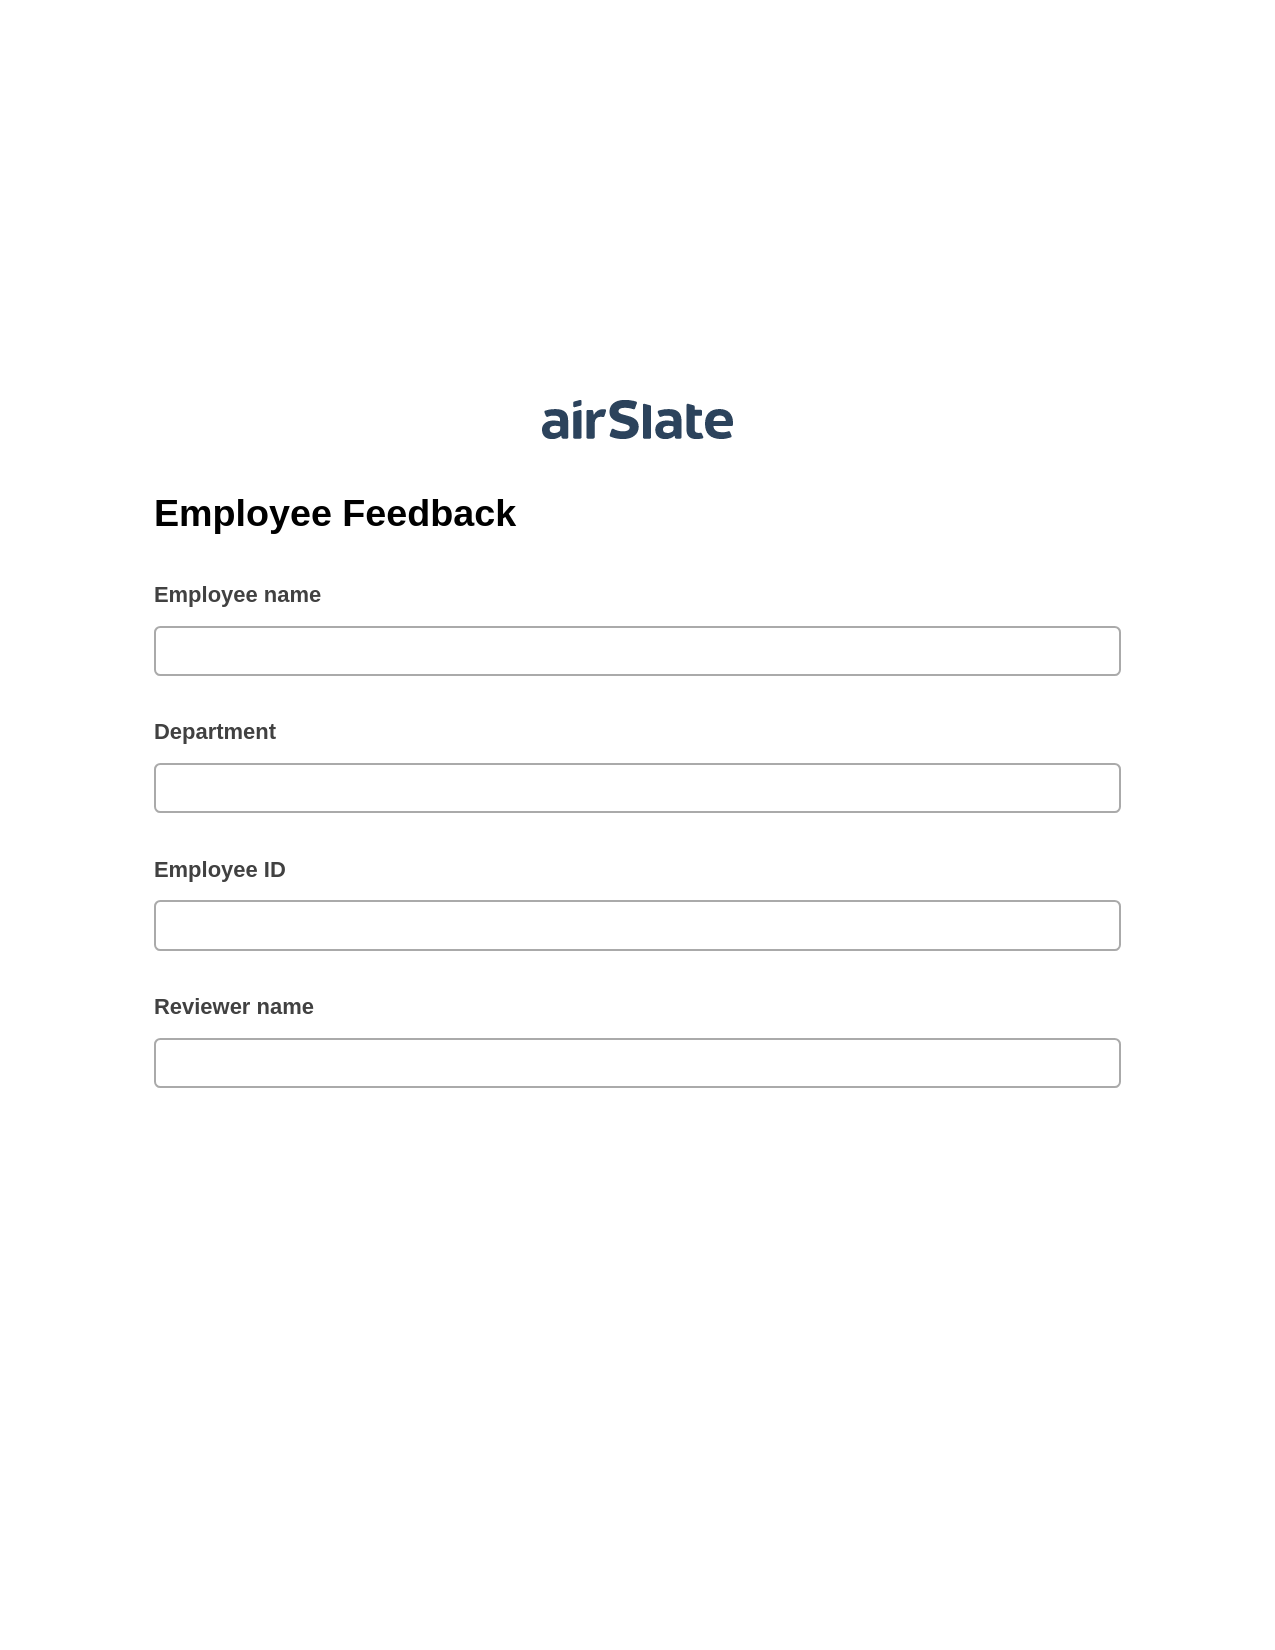 Multirole Employee Feedback Pre-fill from Salesforce Records with SOQL Bot, Update Salesforce Record Bot, Post-finish Document Bot